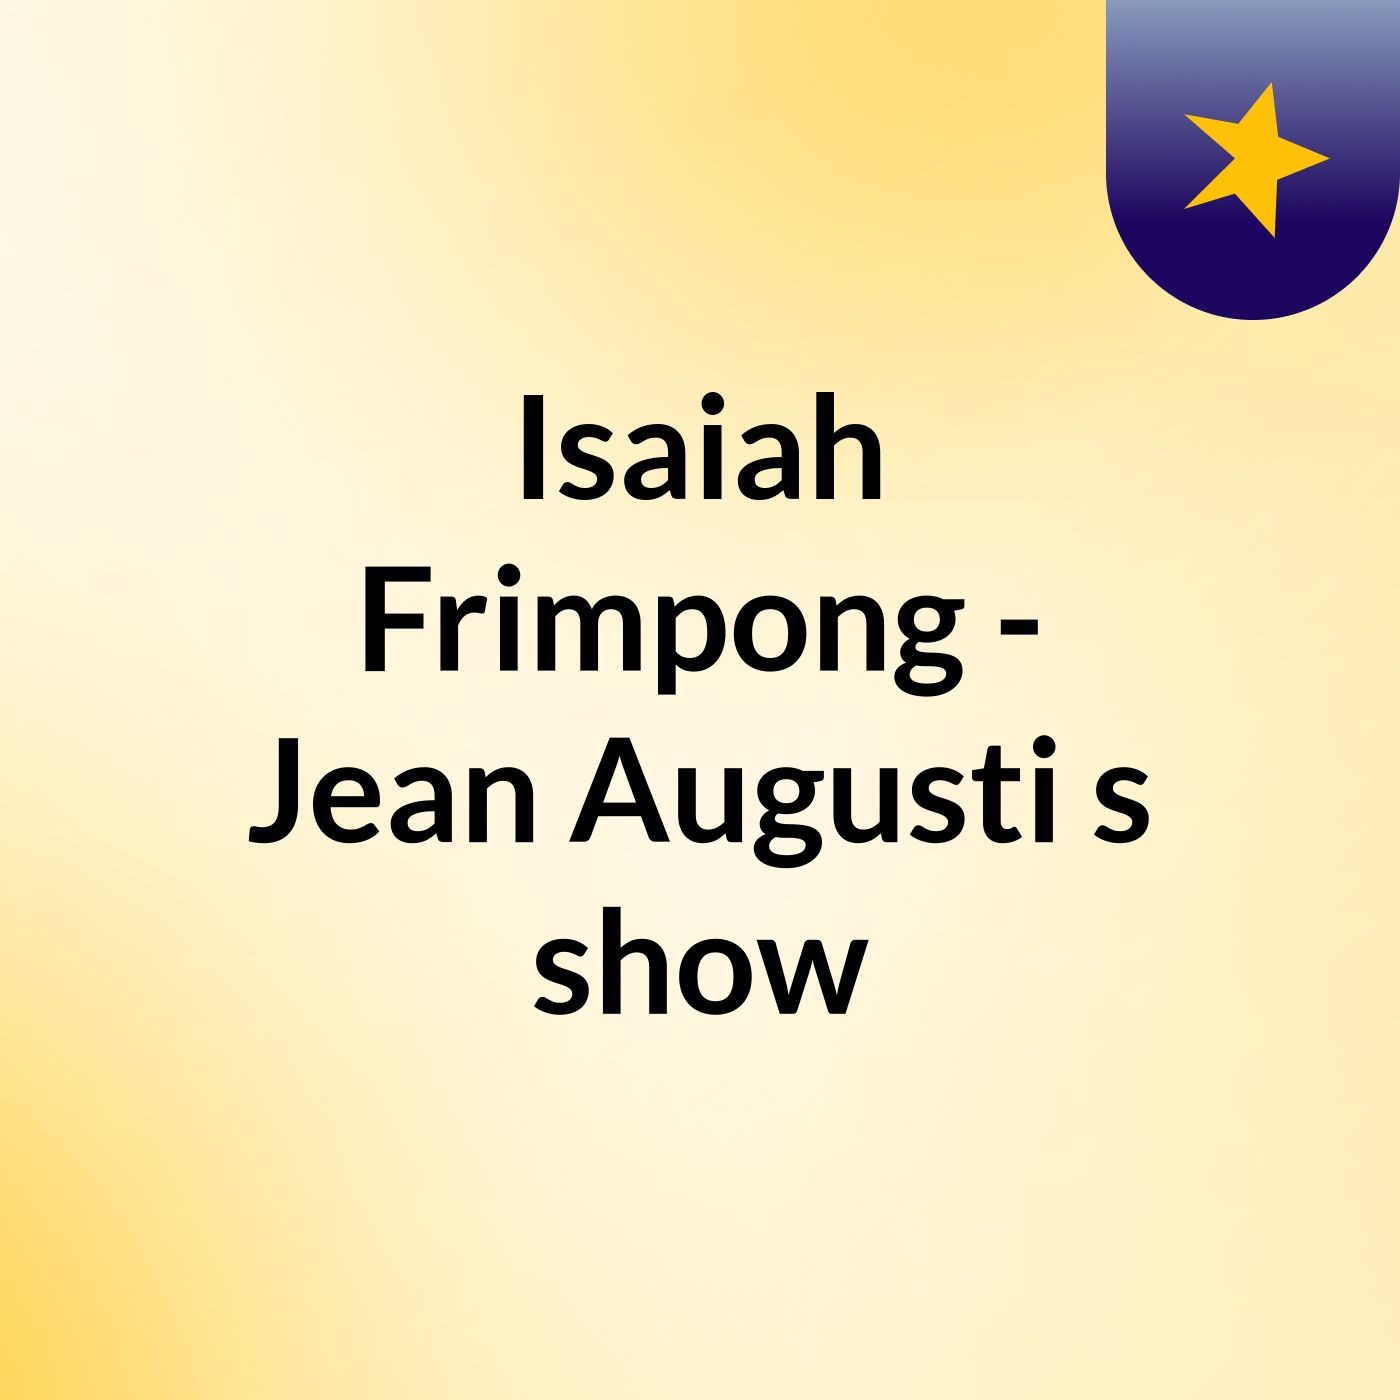 Isaiah Frimpong - Jean Augusti's show